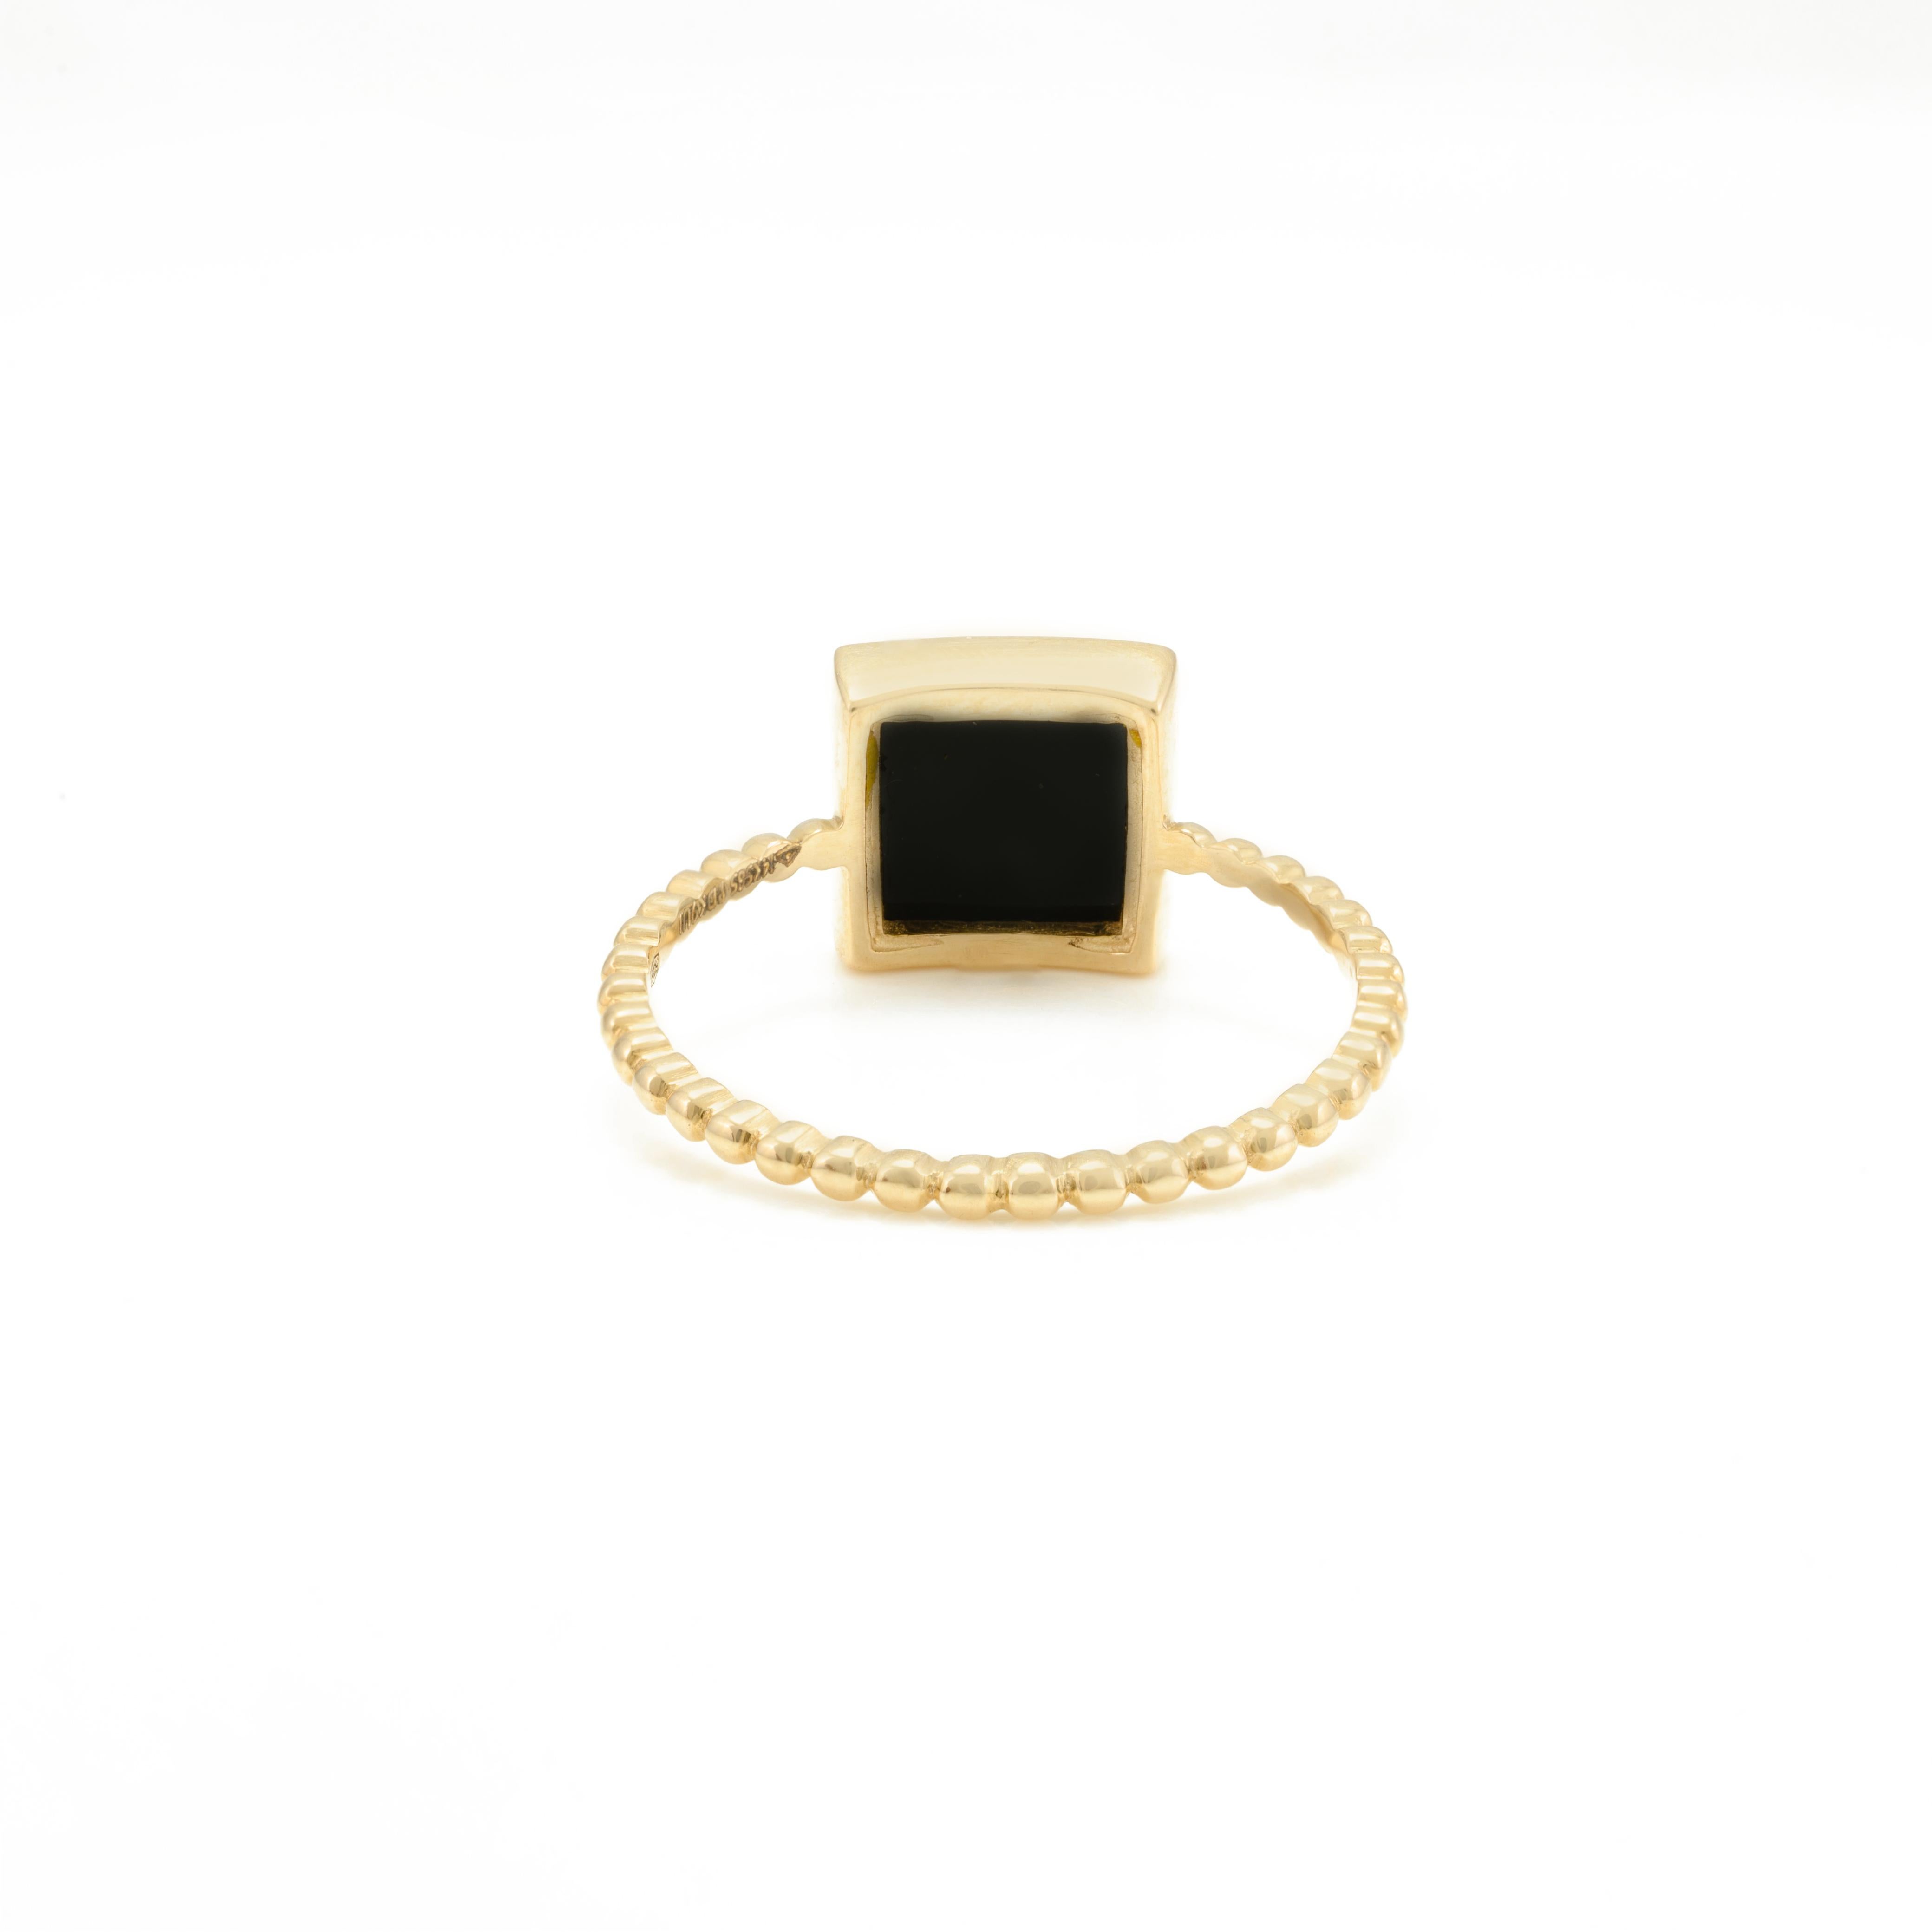 For Sale:  2.44 CTW Black Onyx Single Stone Ring in 14k Solid Yellow Gold 4